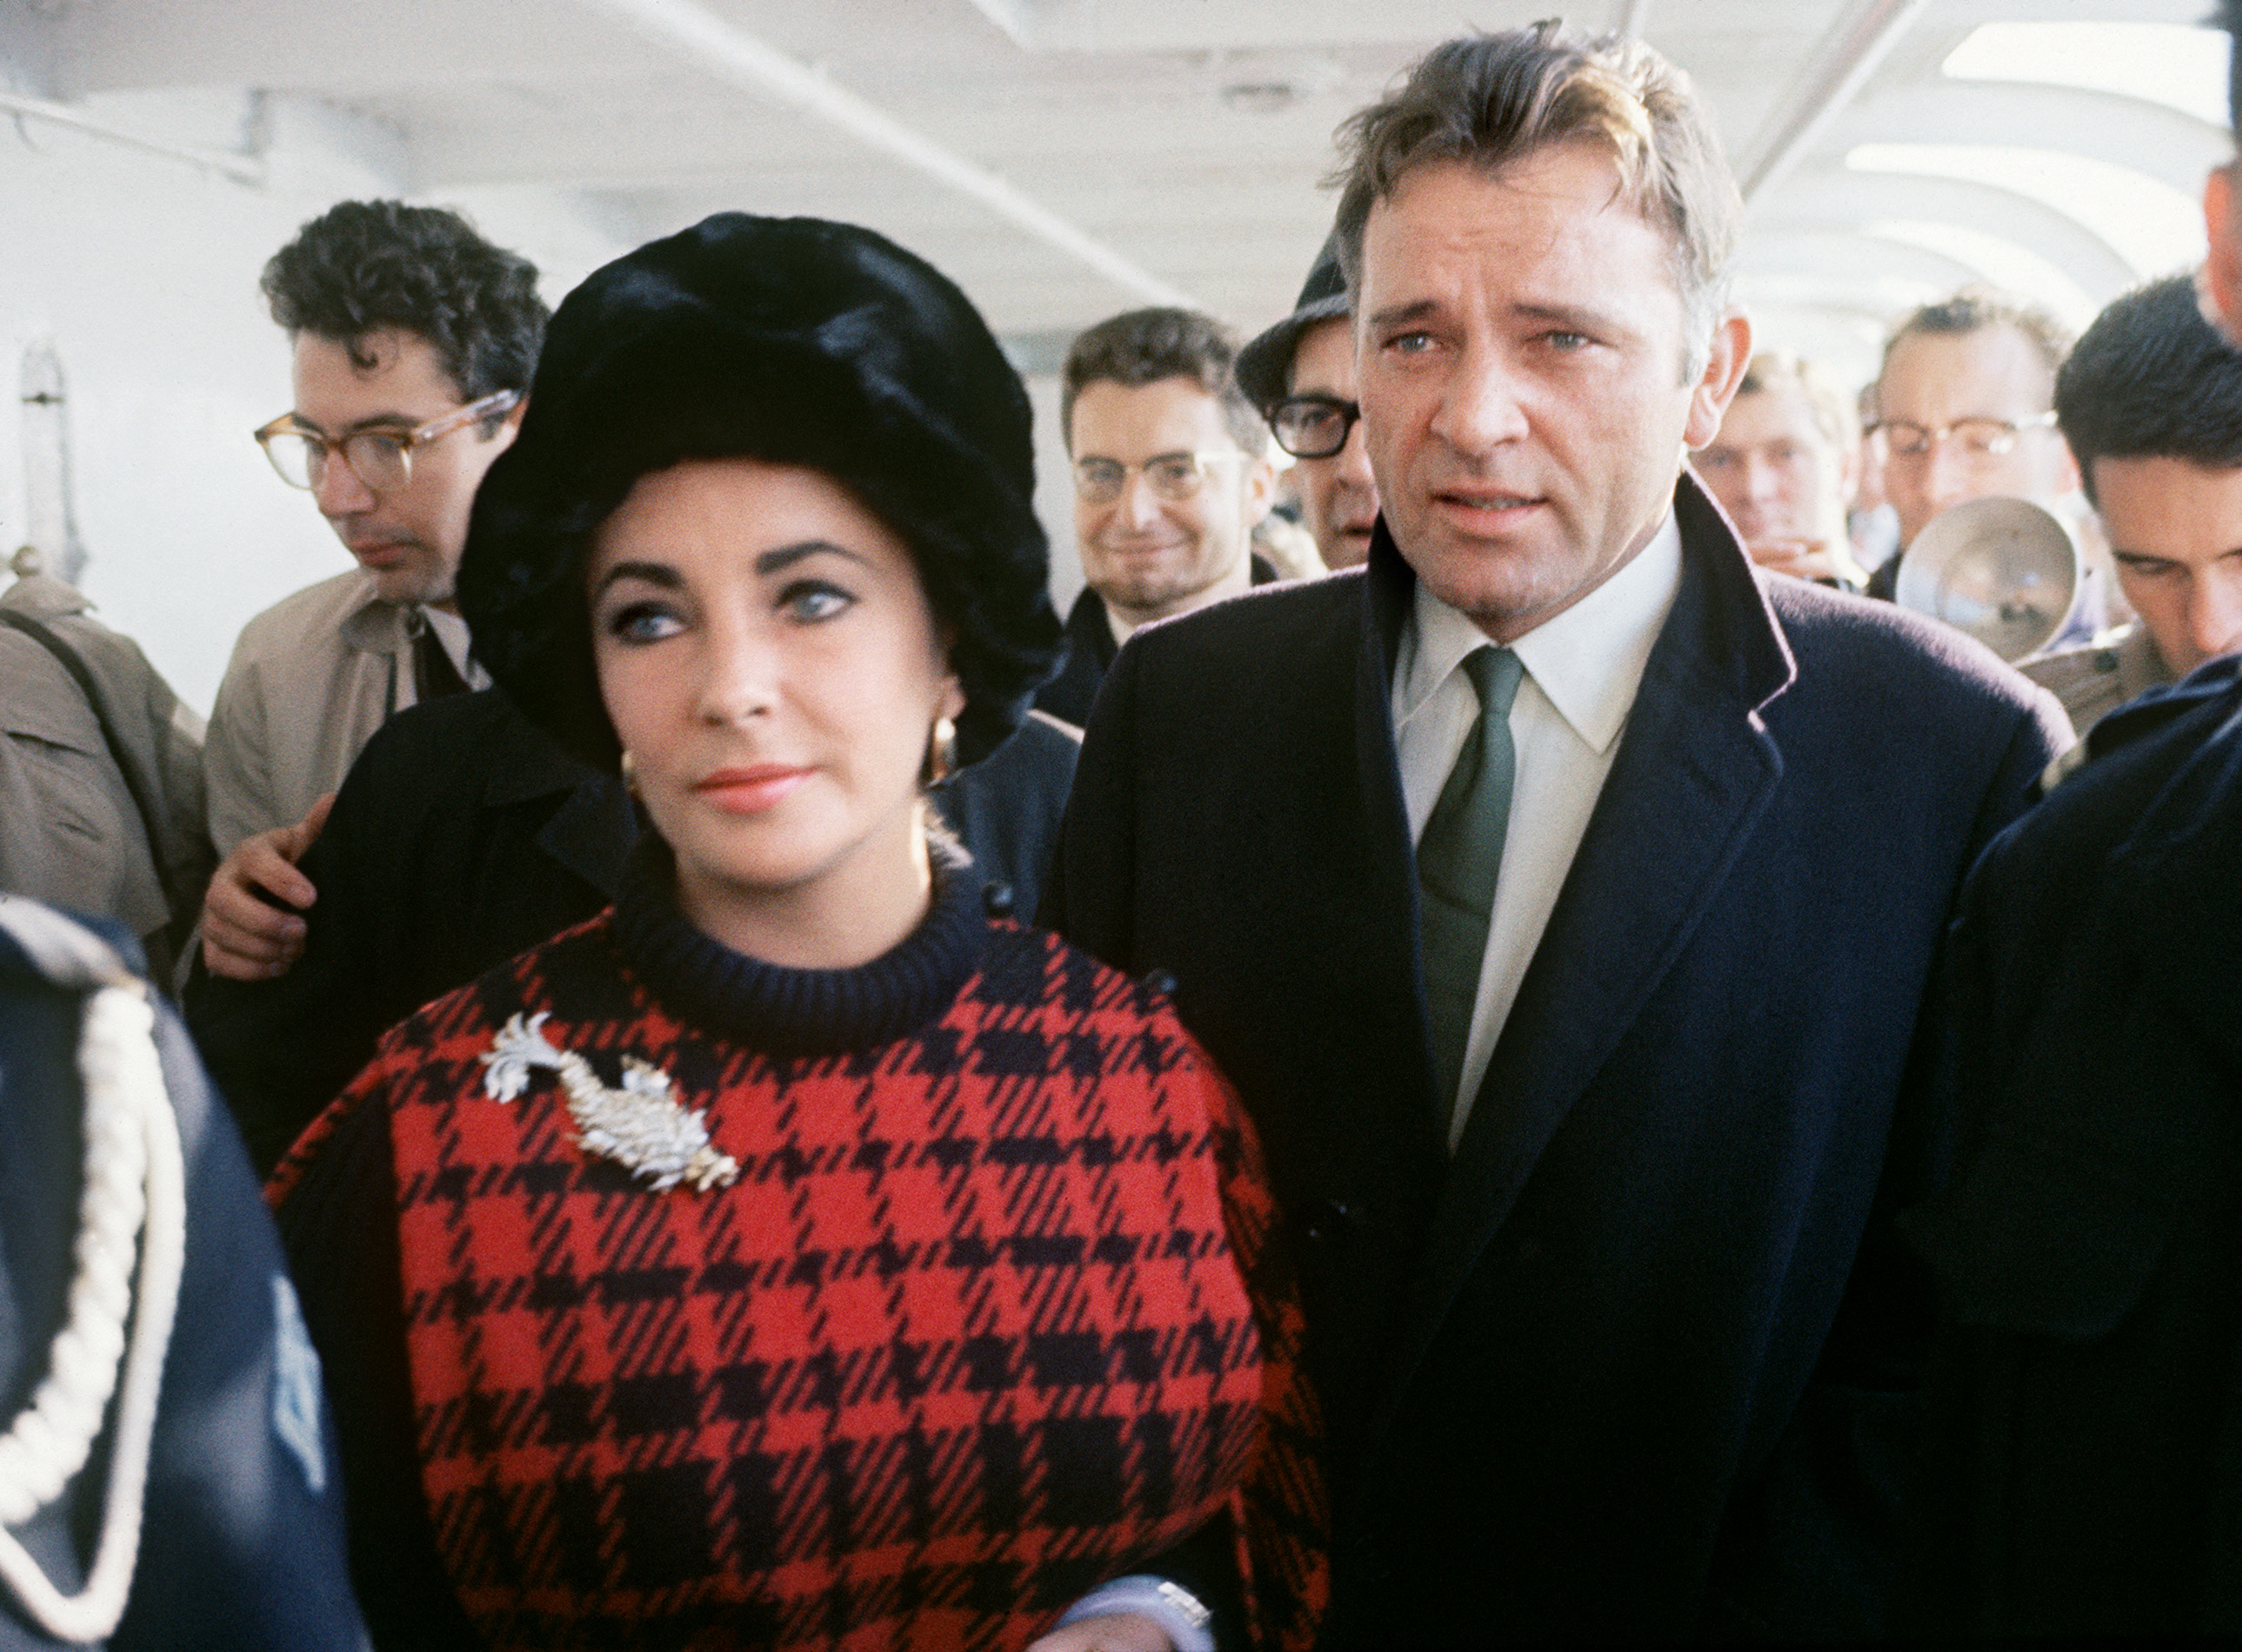 US actress Elizabeth Taylor (L) and her husband British actor Richard Burton are seen on the Transporter bridge in Cherbourg on October 12, 1964 during a trip in France. | Source: Getty Images